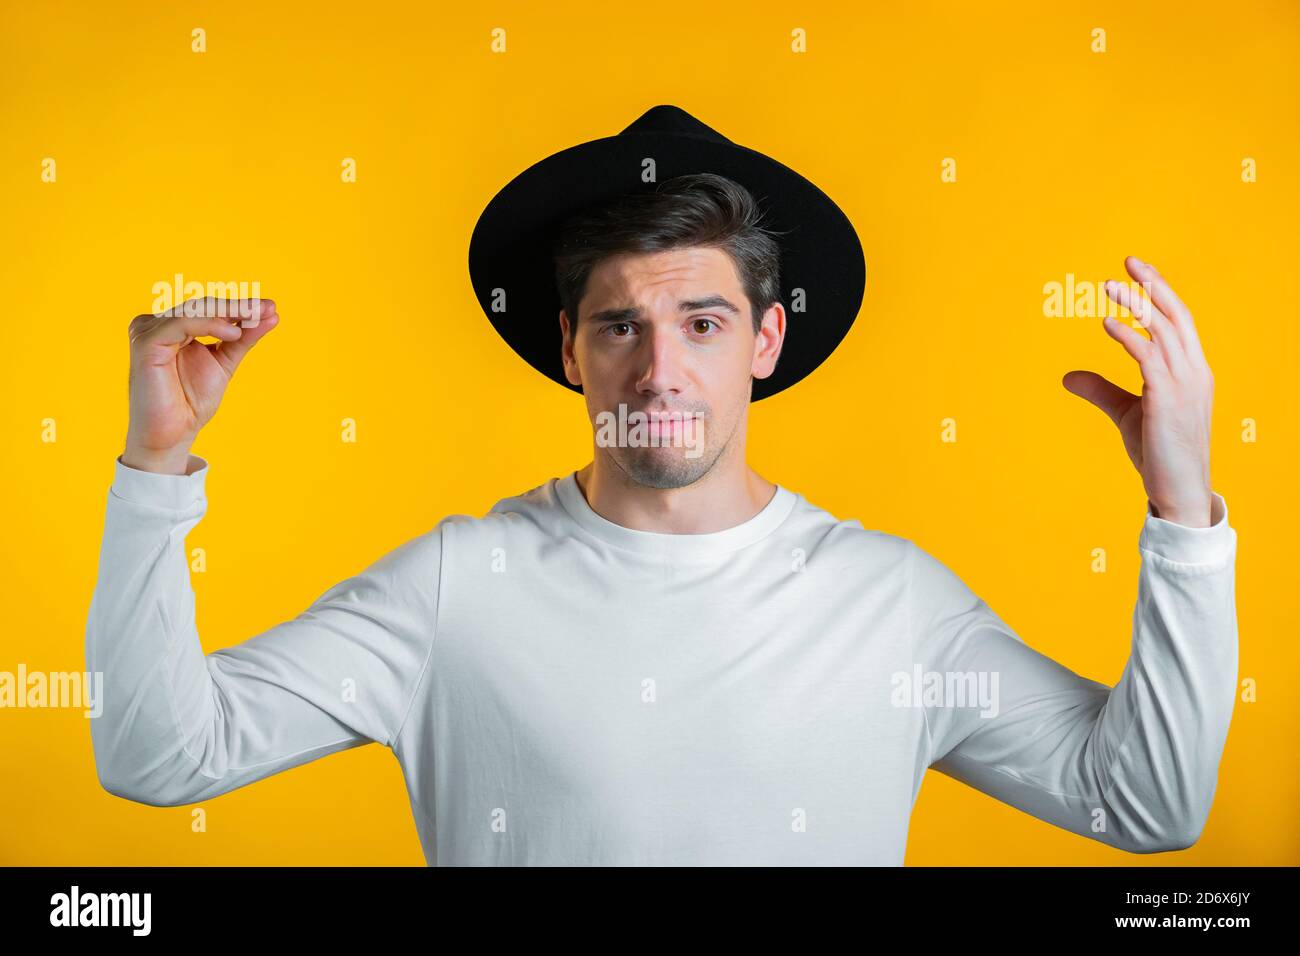 Handsome man showing bla-bla-bla gesture with hands isolated on yellow background. Empty promises, blah concept. Lier. Stock Photo